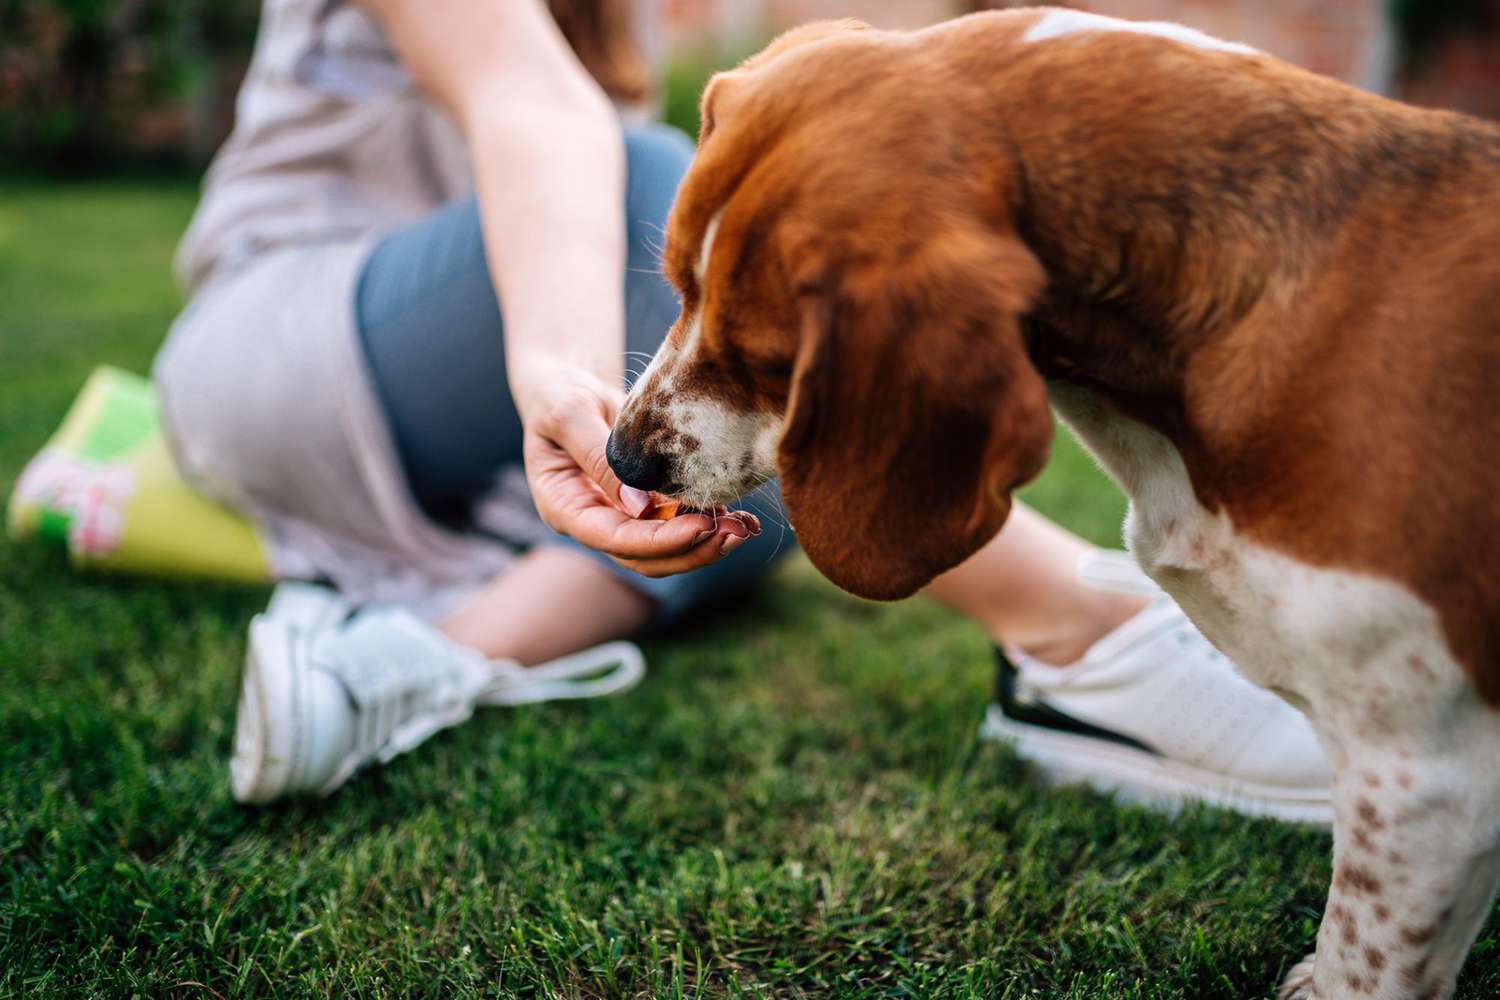 dog eating from human's hand while sitting in the grass